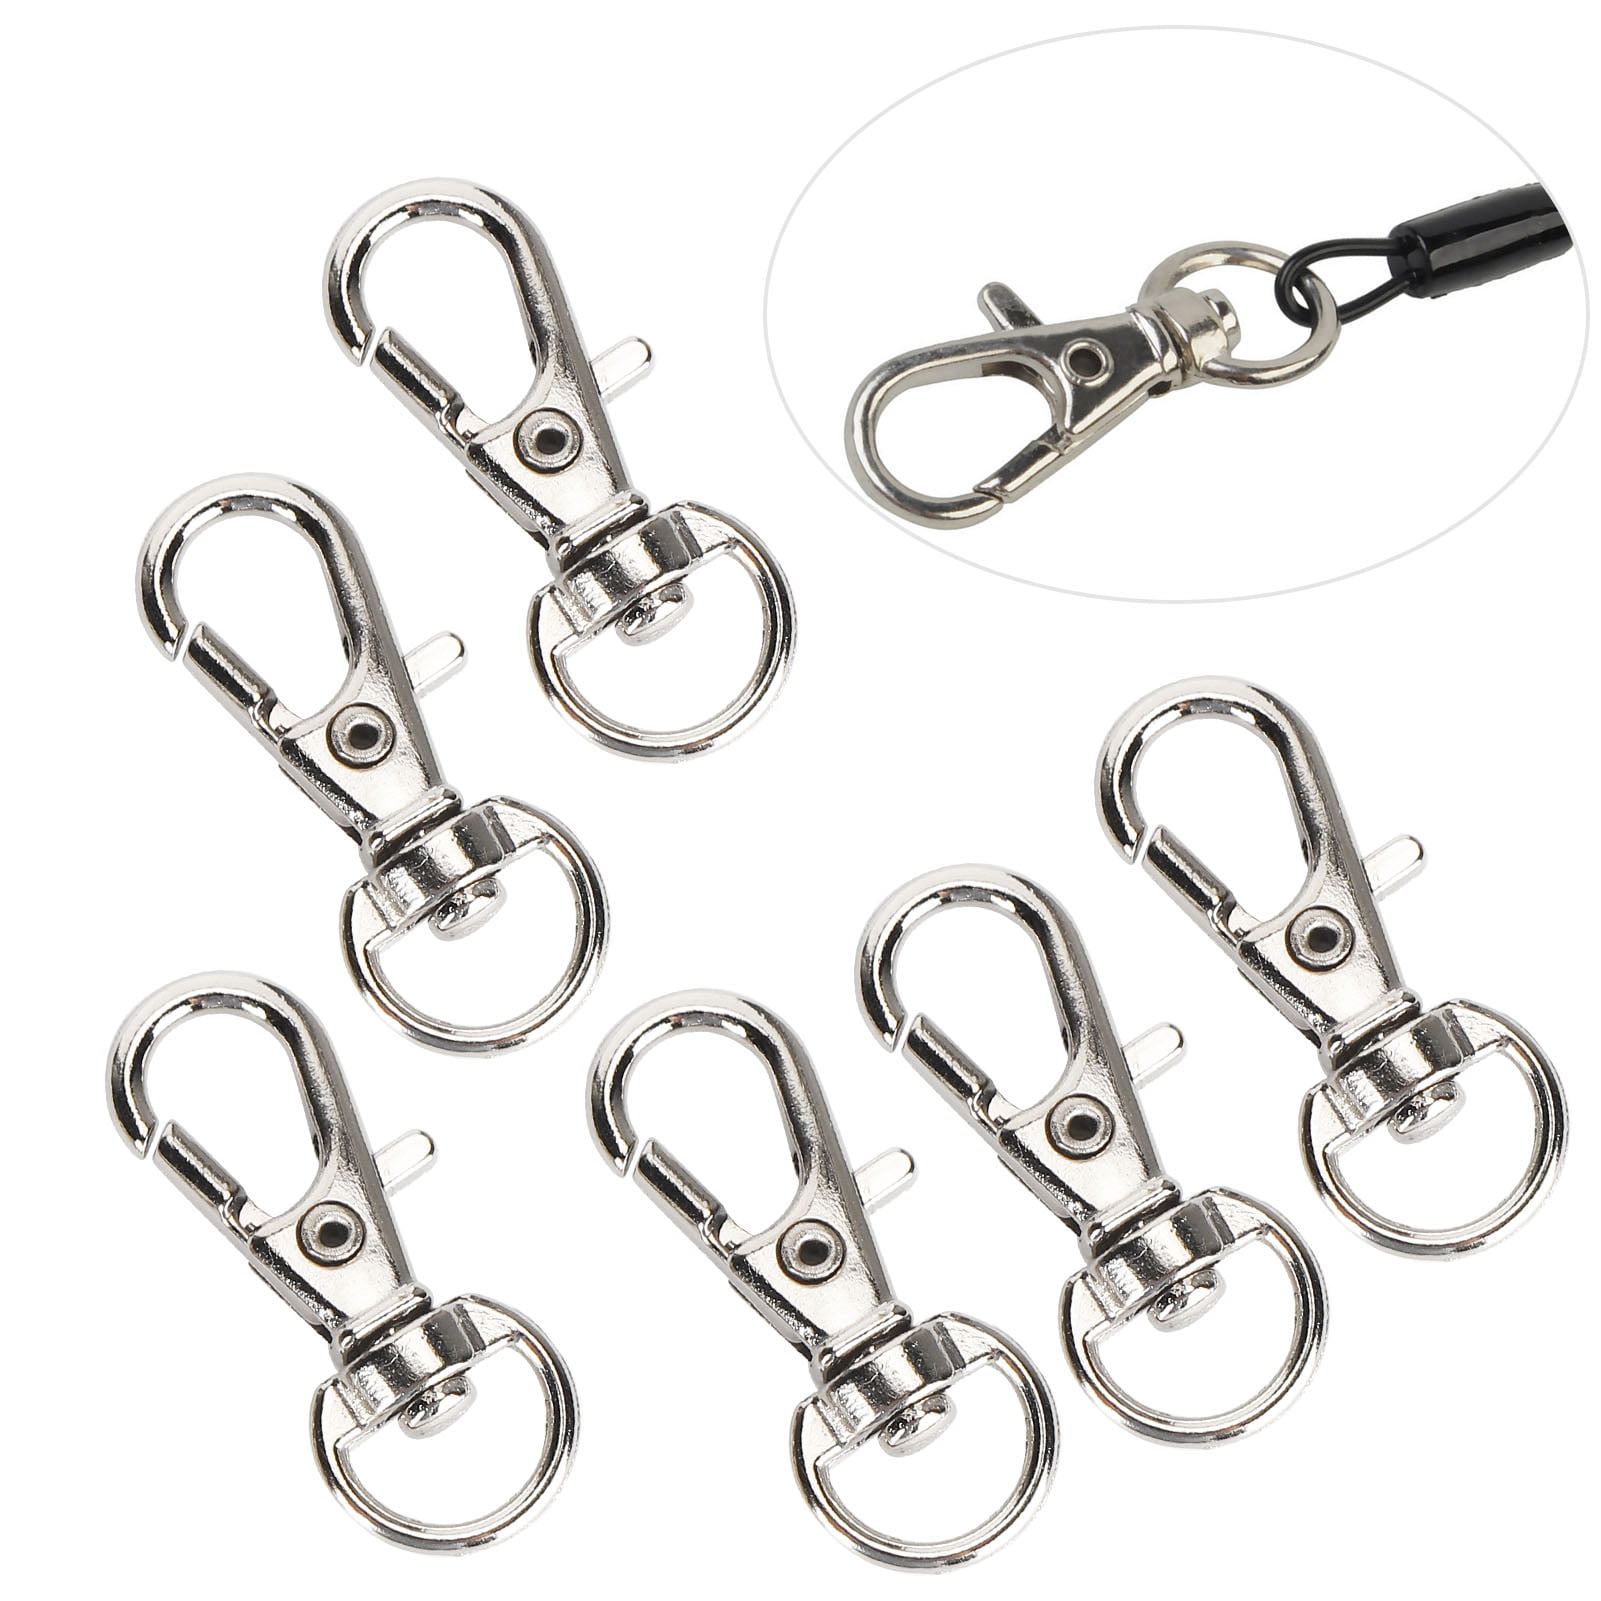 Details about   5X Spring SF Hooks Carabiner Key Chain Clip Hook Outdoor Buckle EDC Small SG 